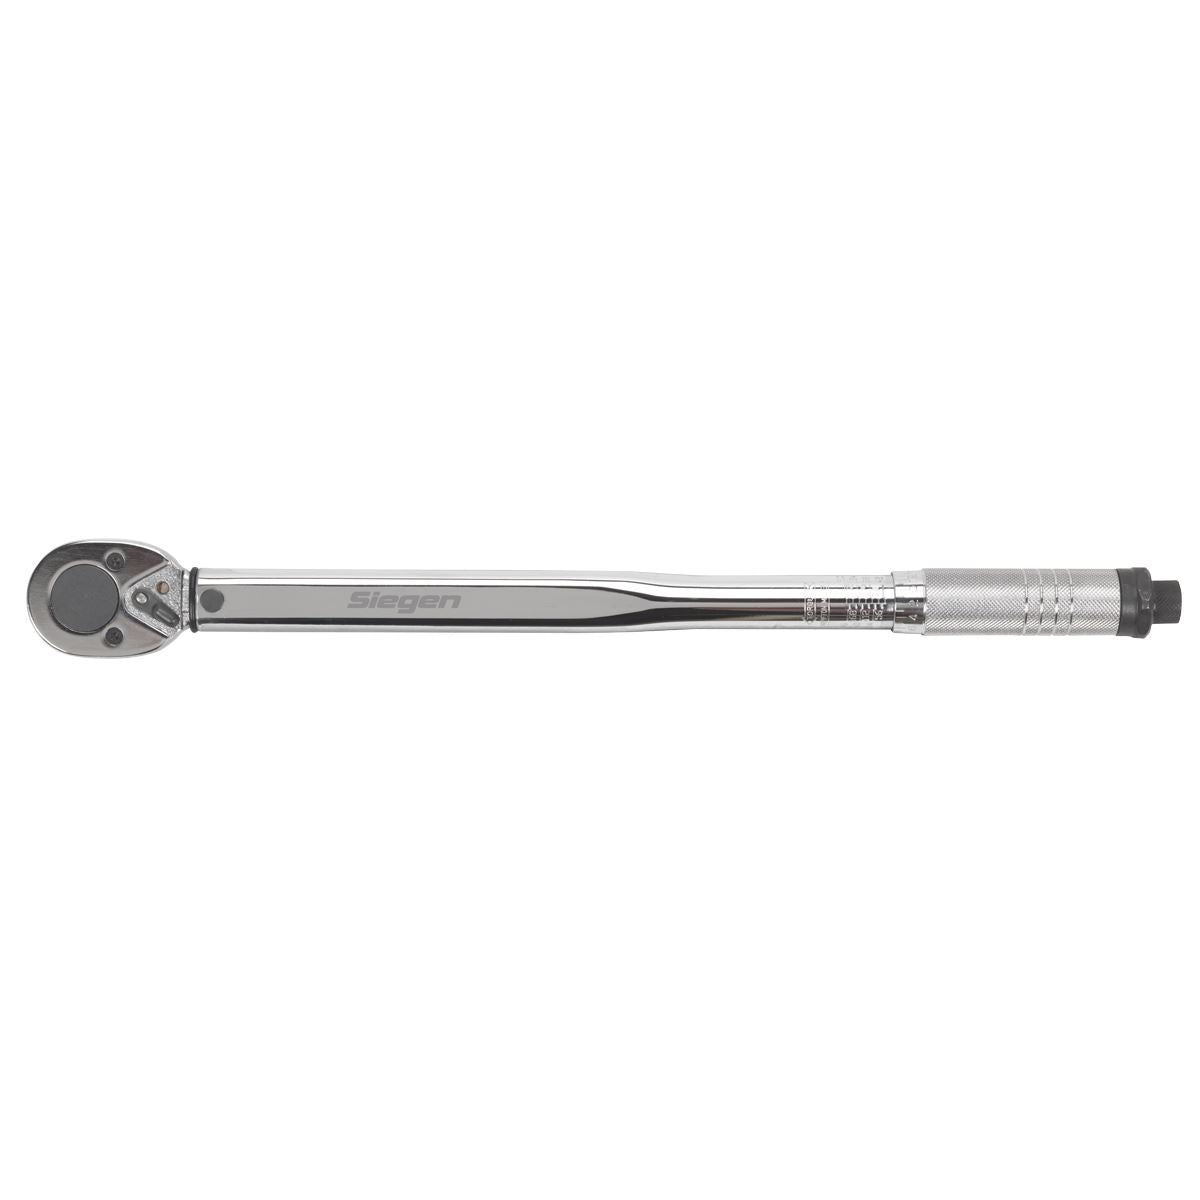 Siegen by Sealey Torque Wrench 1/2"Sq Drive